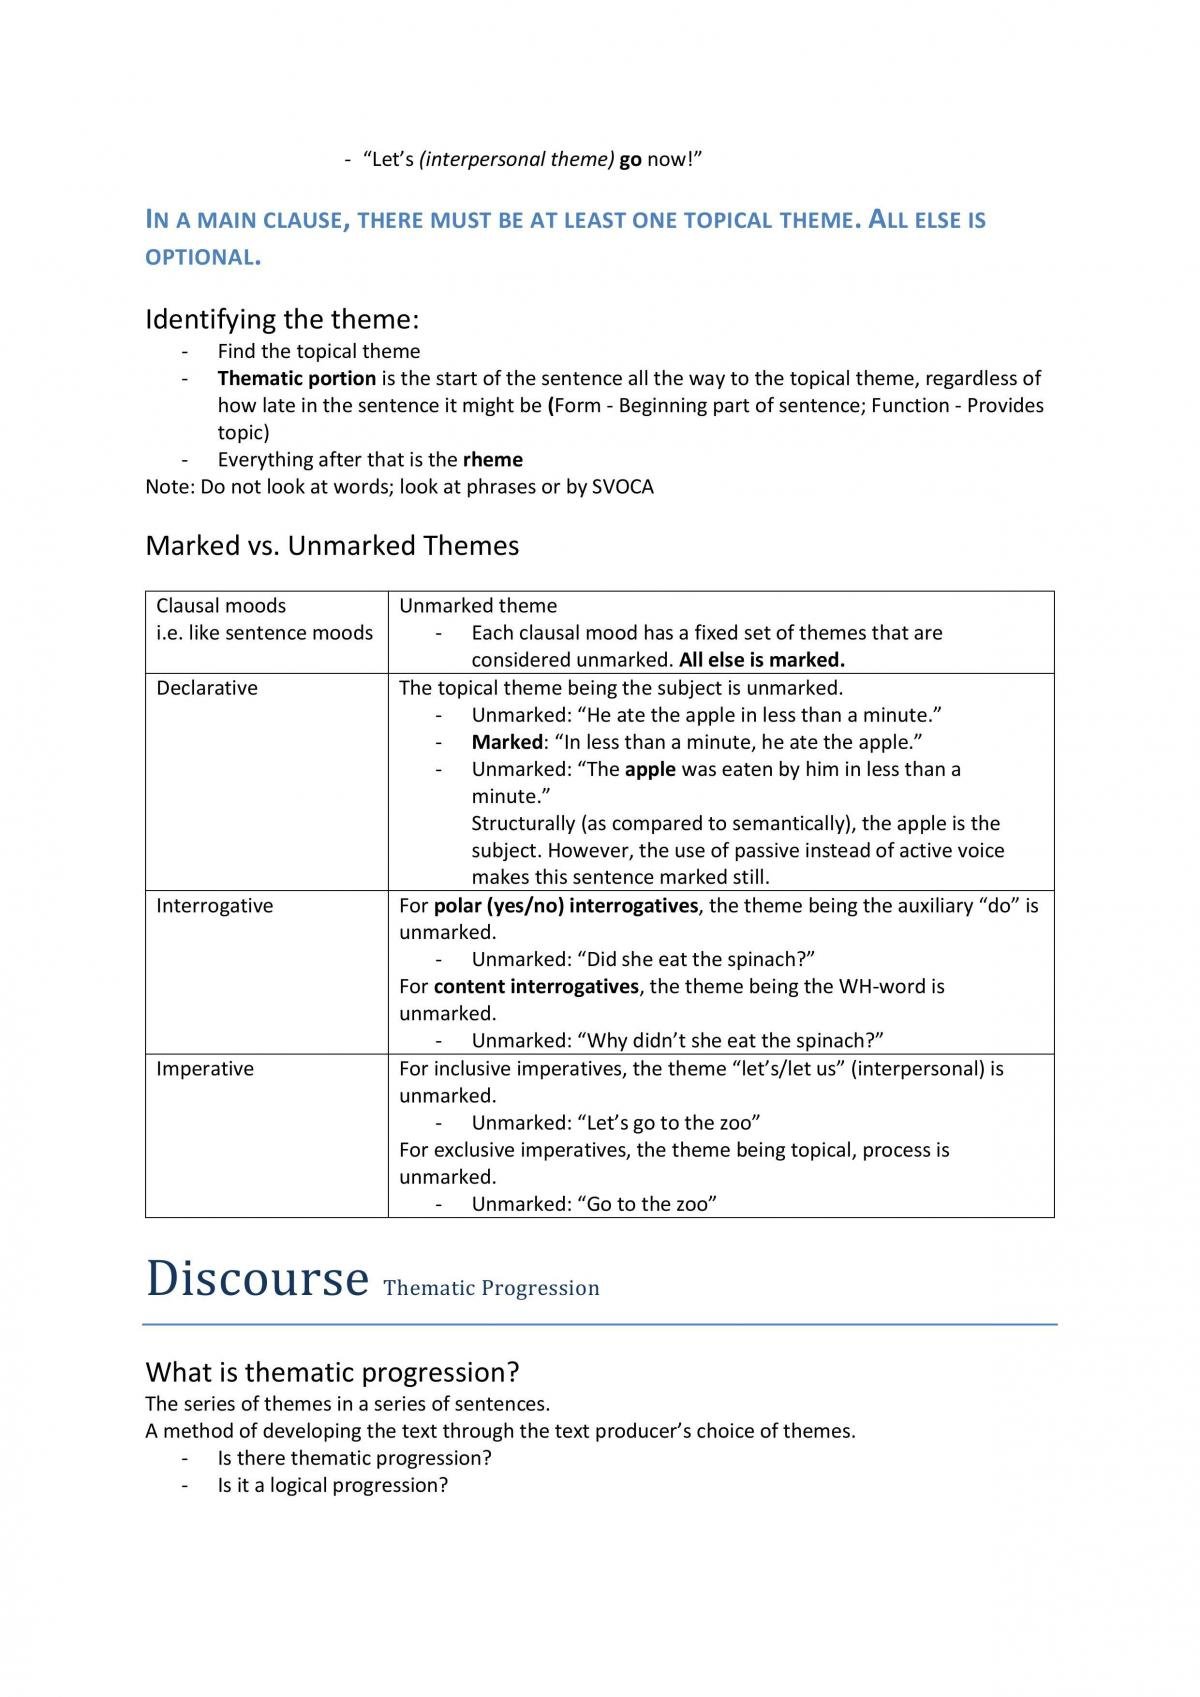 H2 English Language and Linguistics Complete Study Notes - Page 28